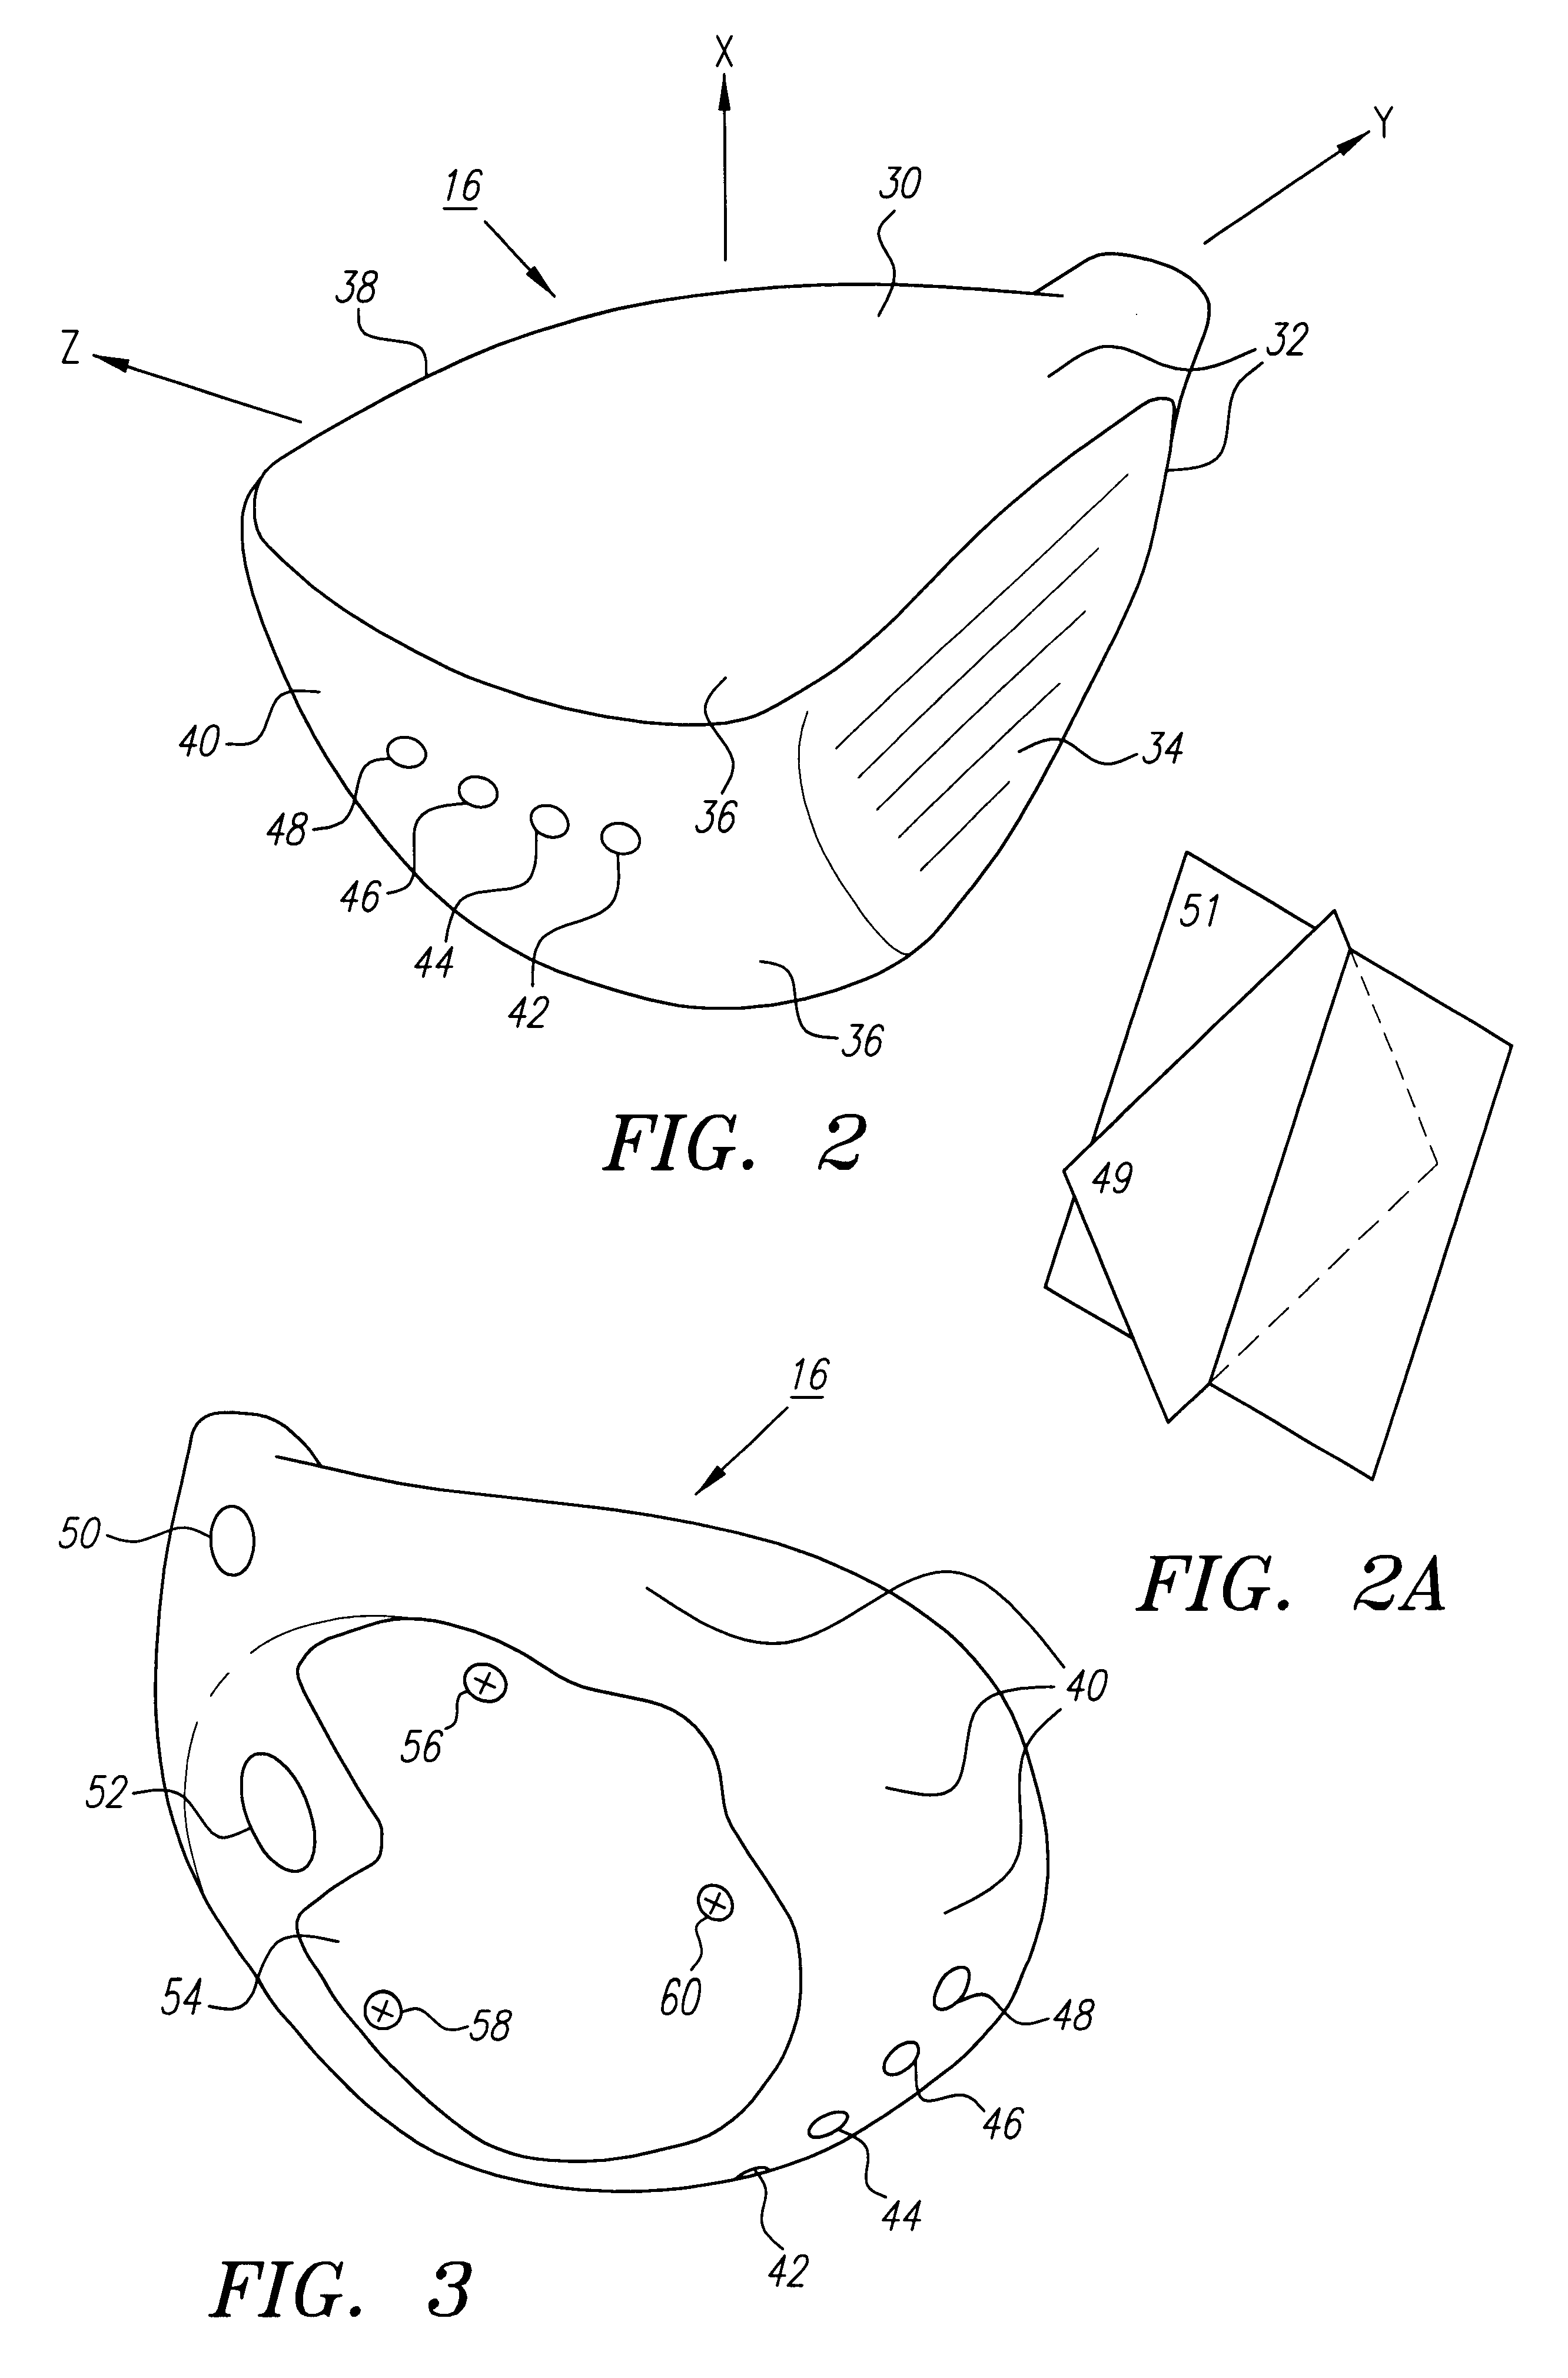 Instrumented golf club system and method of use